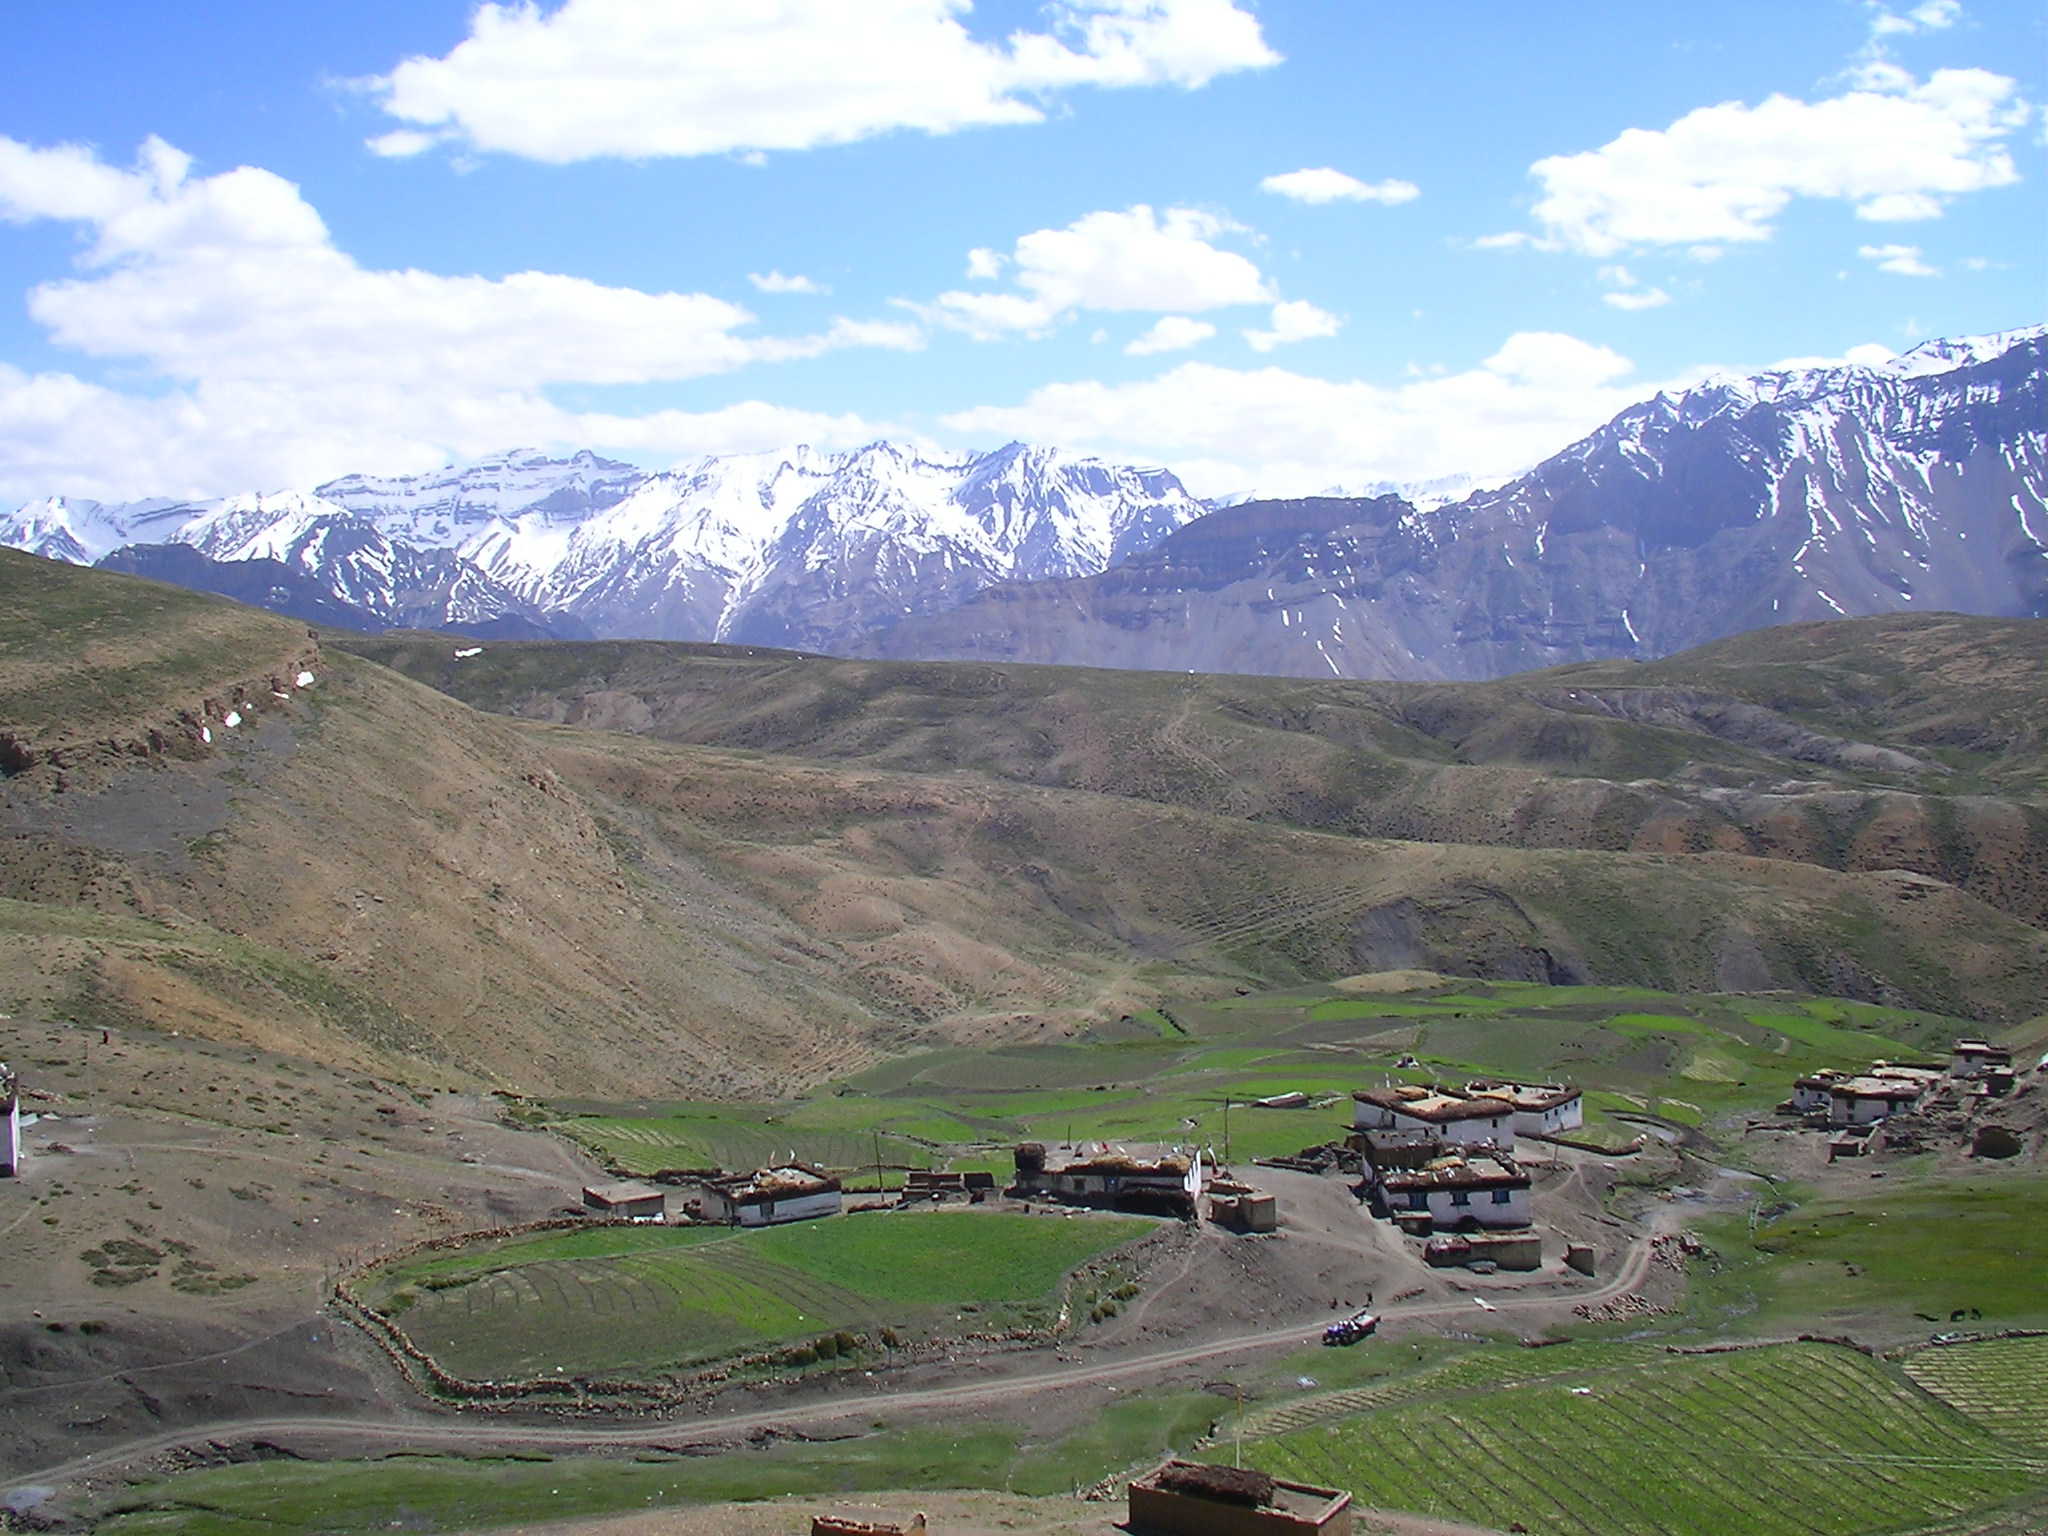 Pictures of Himalayas, Villages in India, Spiti, Komik